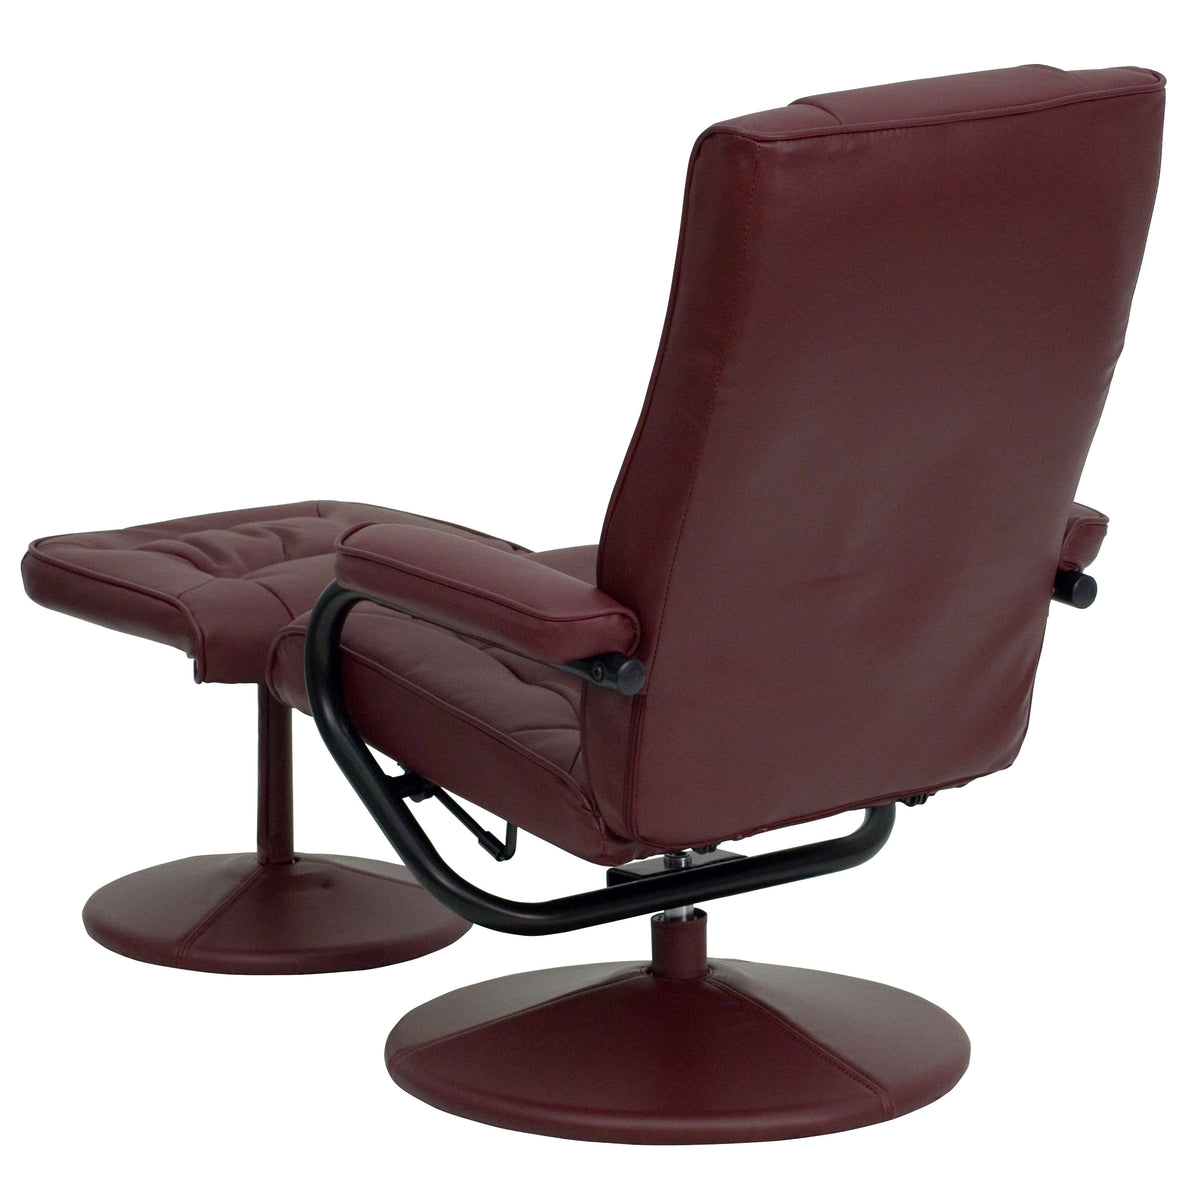 Burgundy |#| Burgundy LeatherSoft Multi-Position Recliner and Ottoman with Wrapped Base